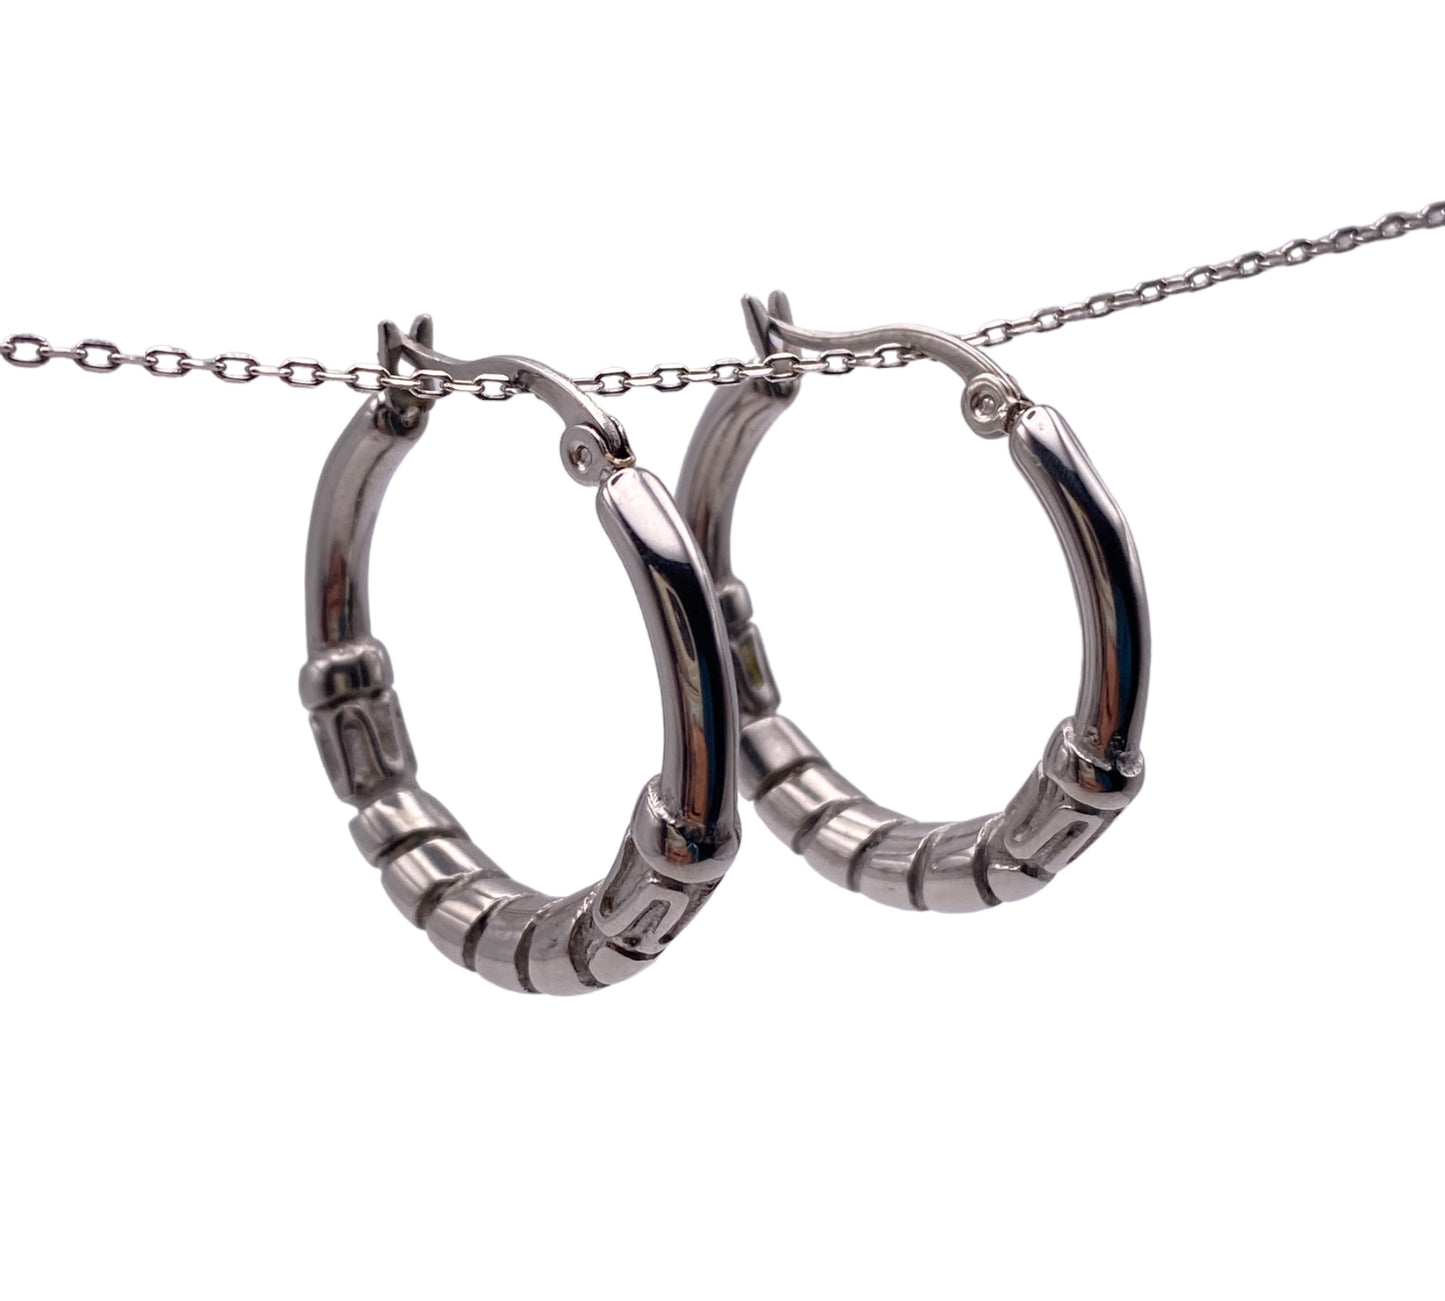 "WILDFIRE" silver colored hoops